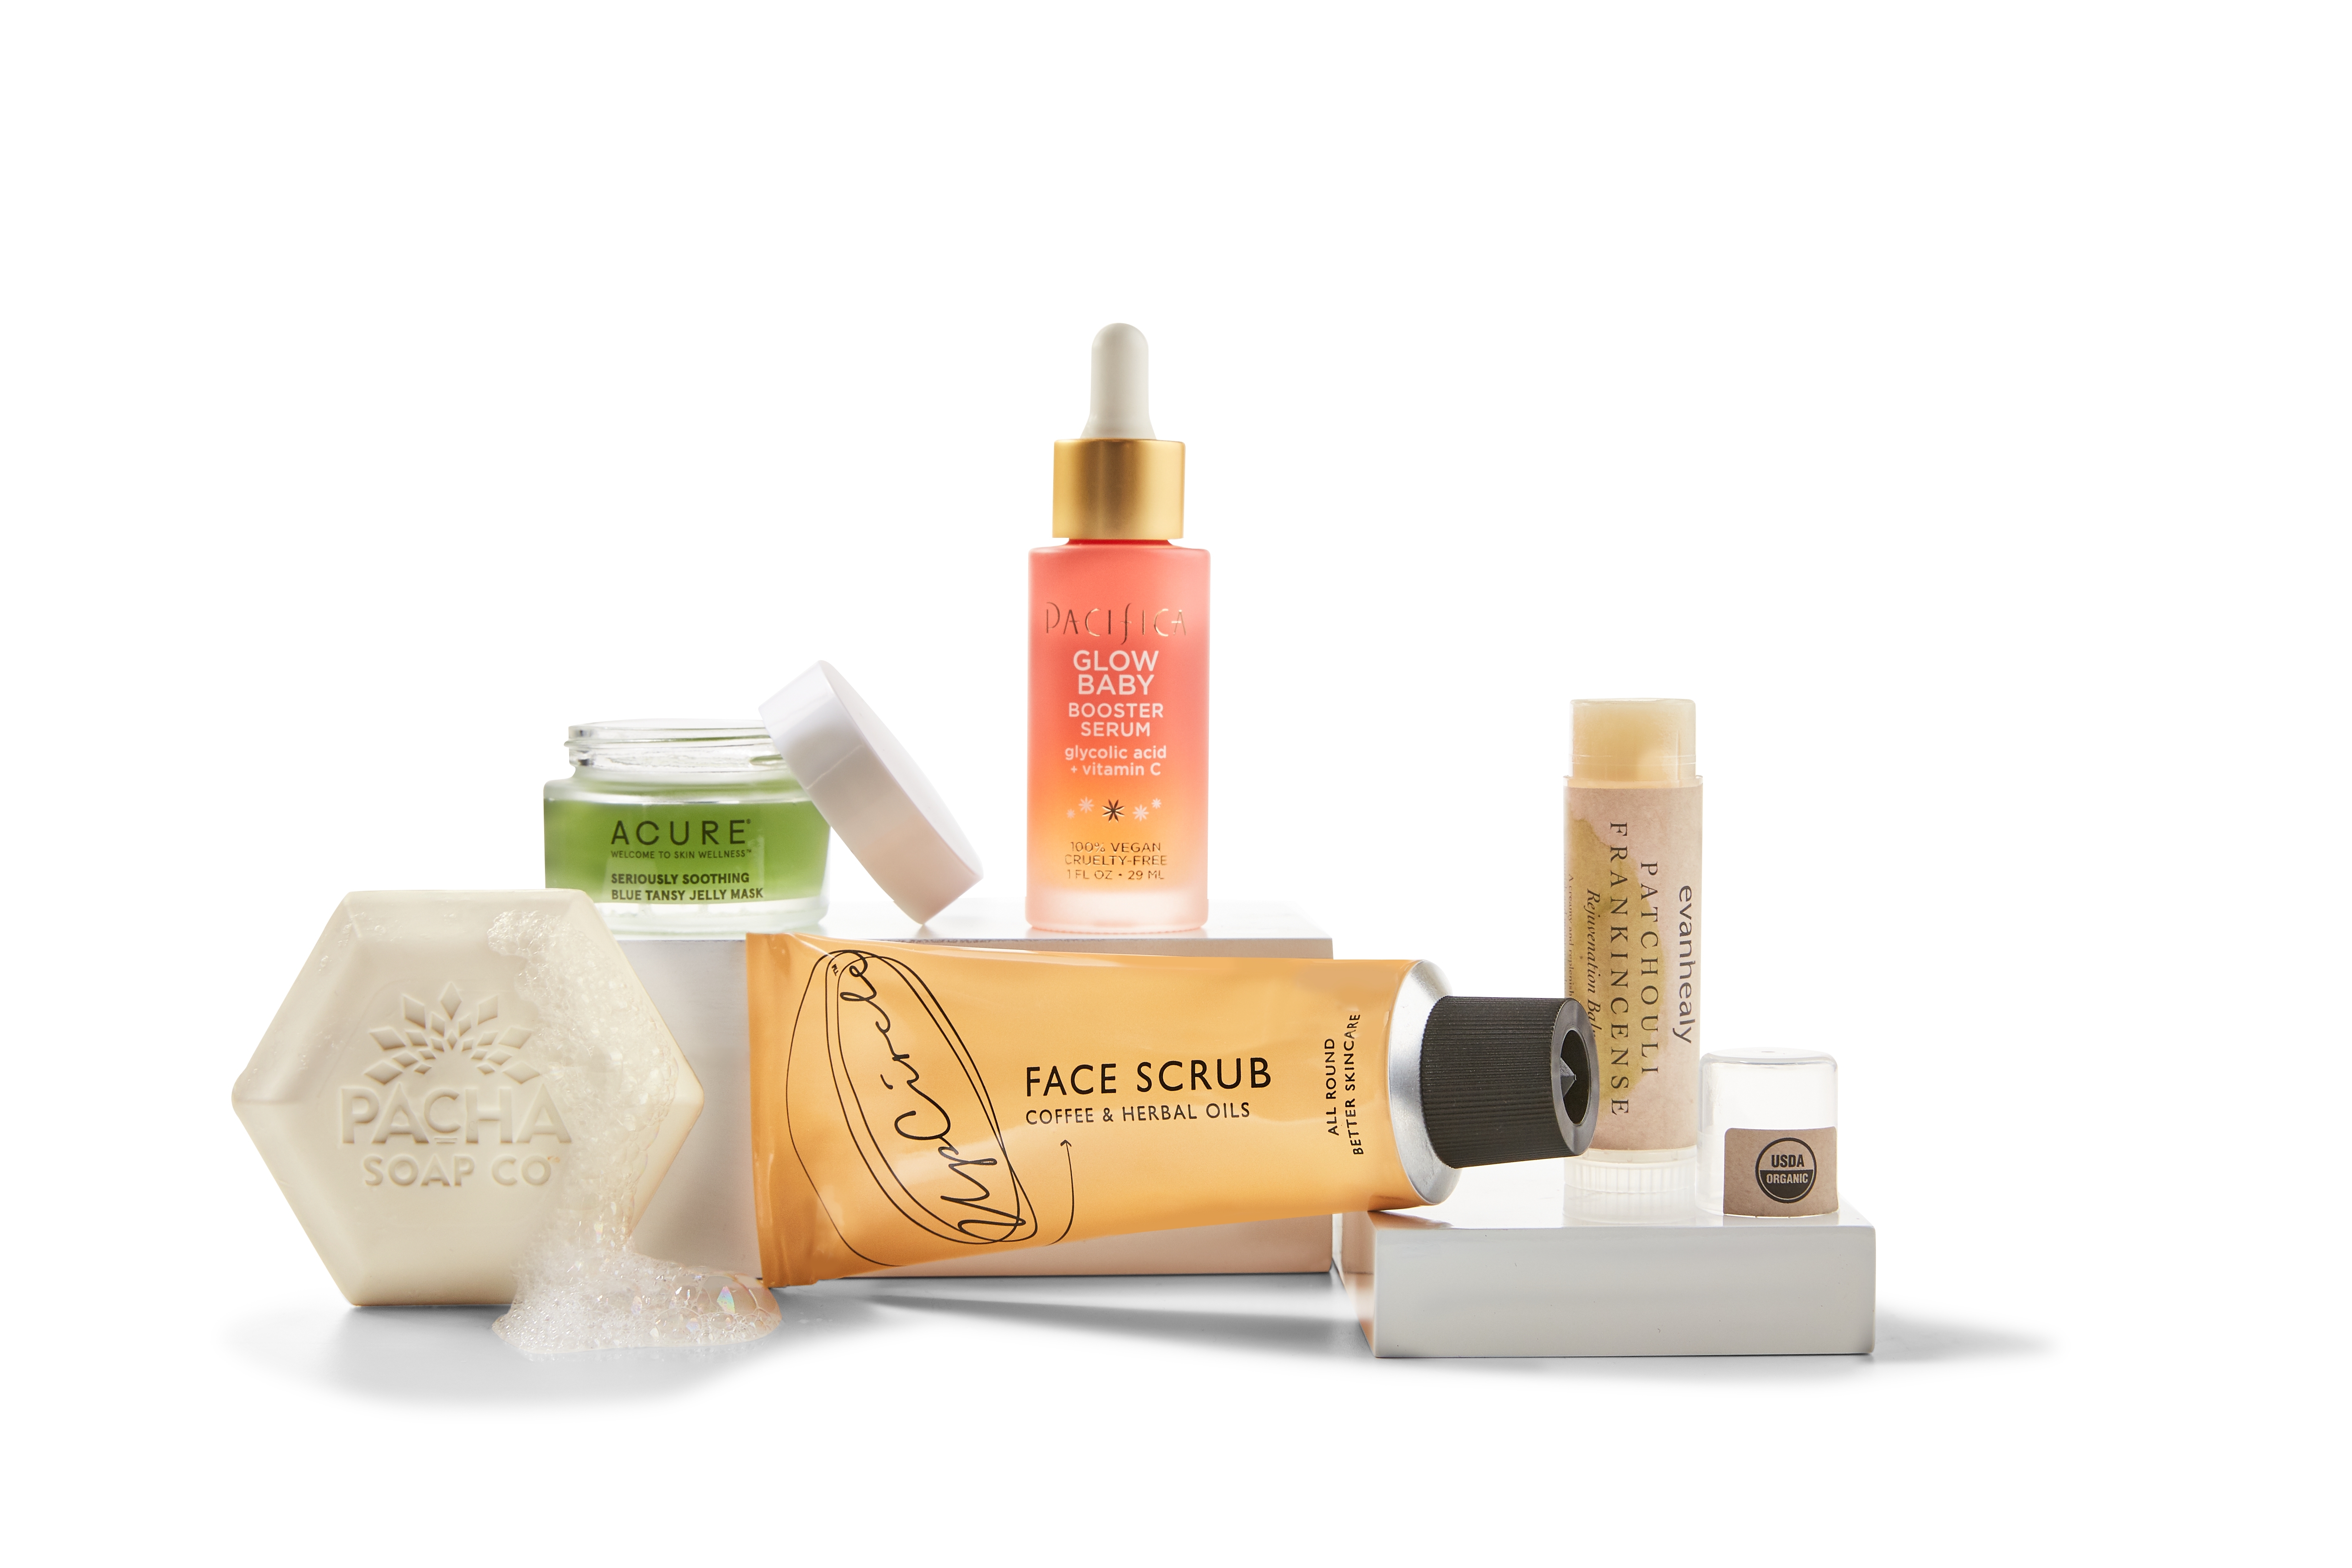 Whole Market Clean Beauty Trends 2021 | Business Wire